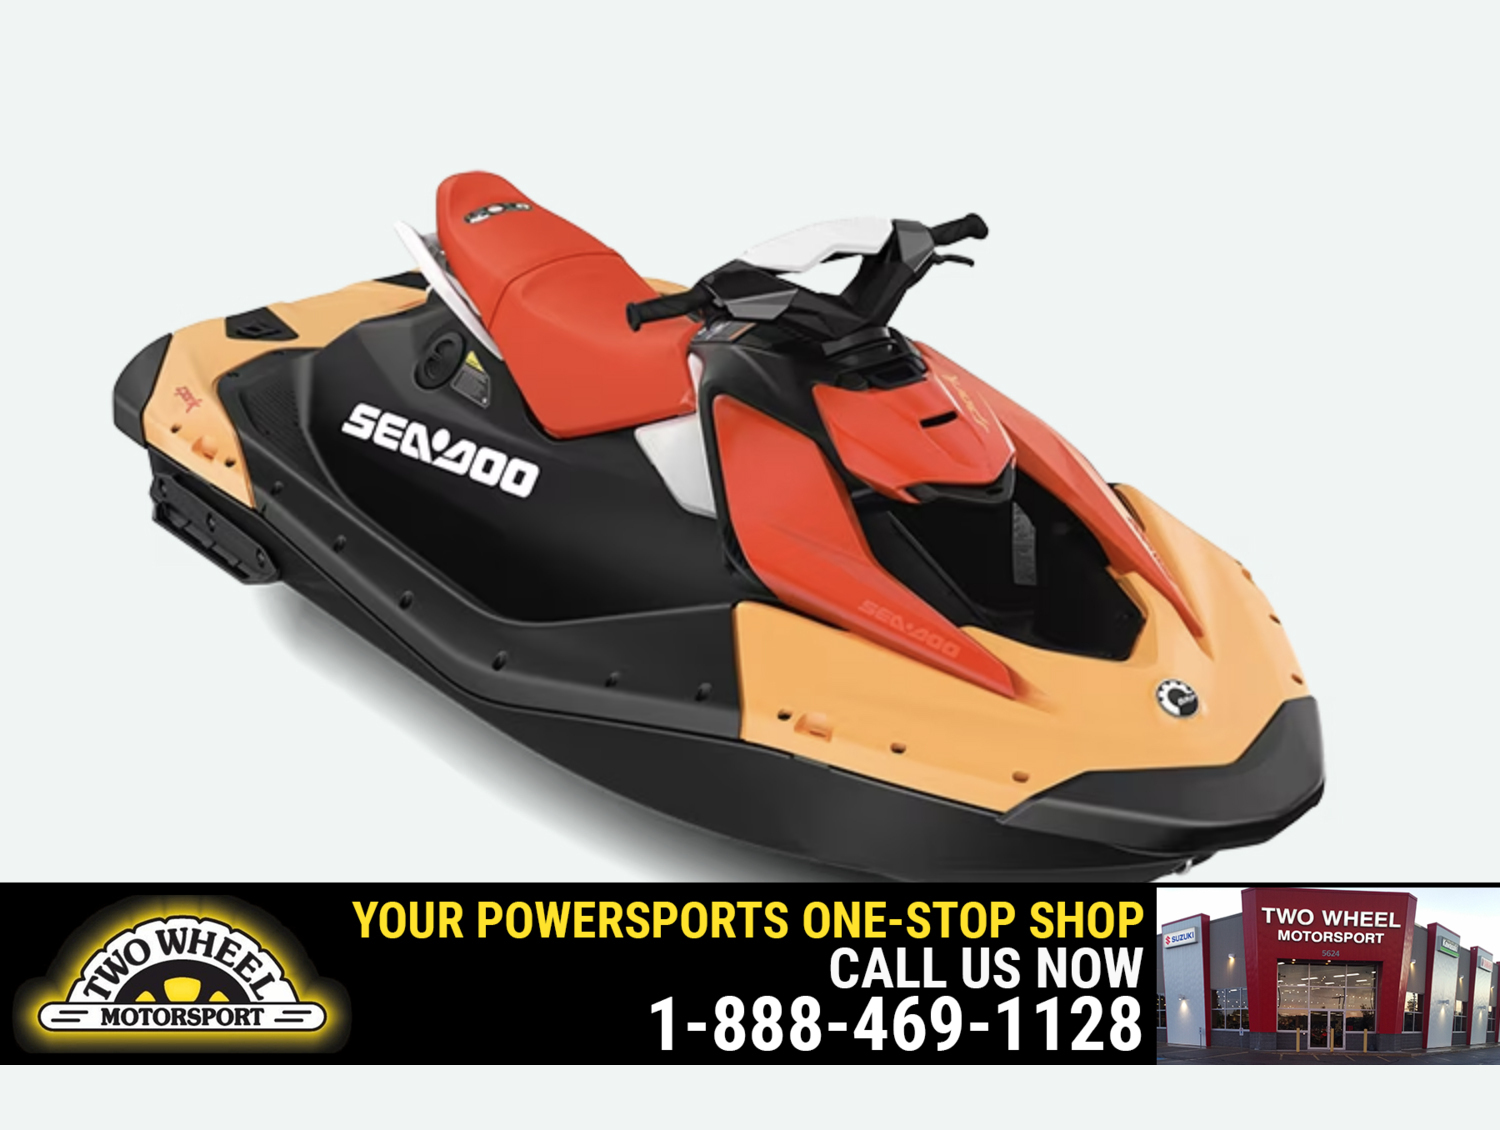 2024 Sea-Doo Spark for 2 2up in 3 diffrent model configurations